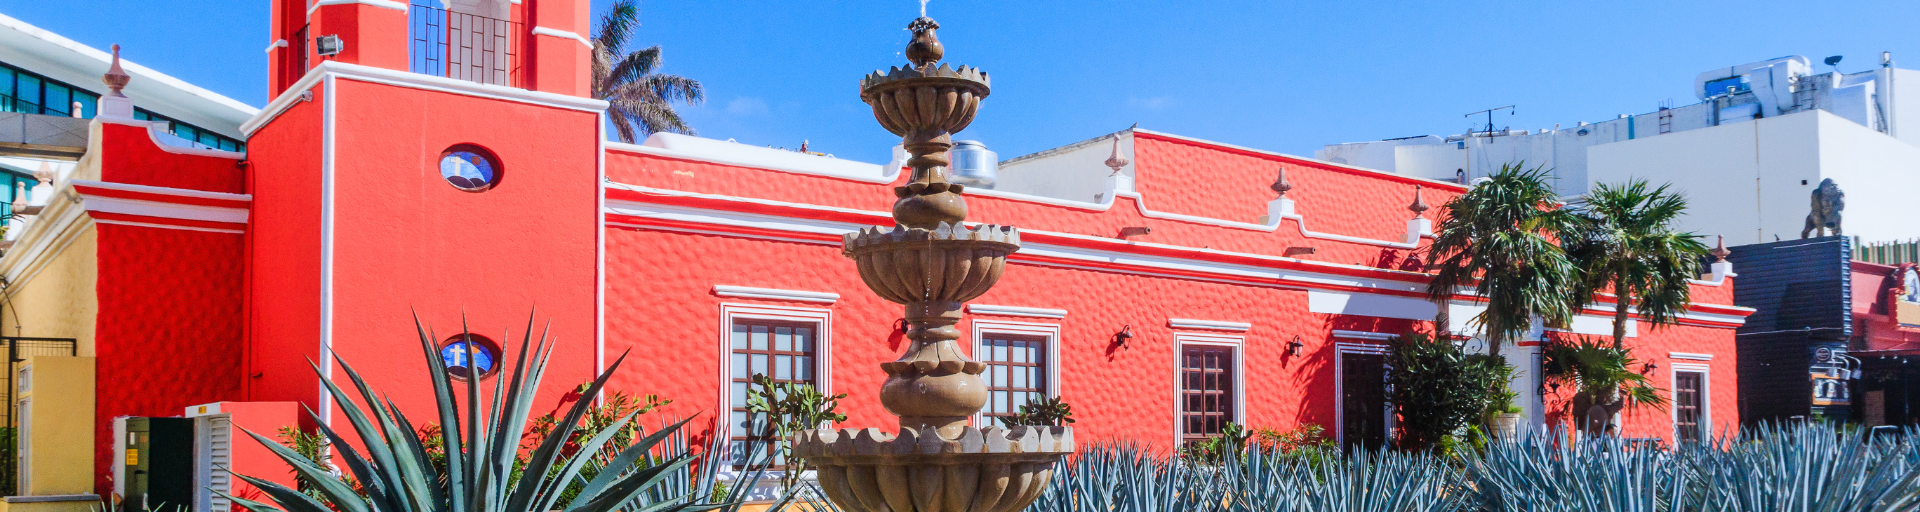 Colorful building in Yucatan on the Global Network Program